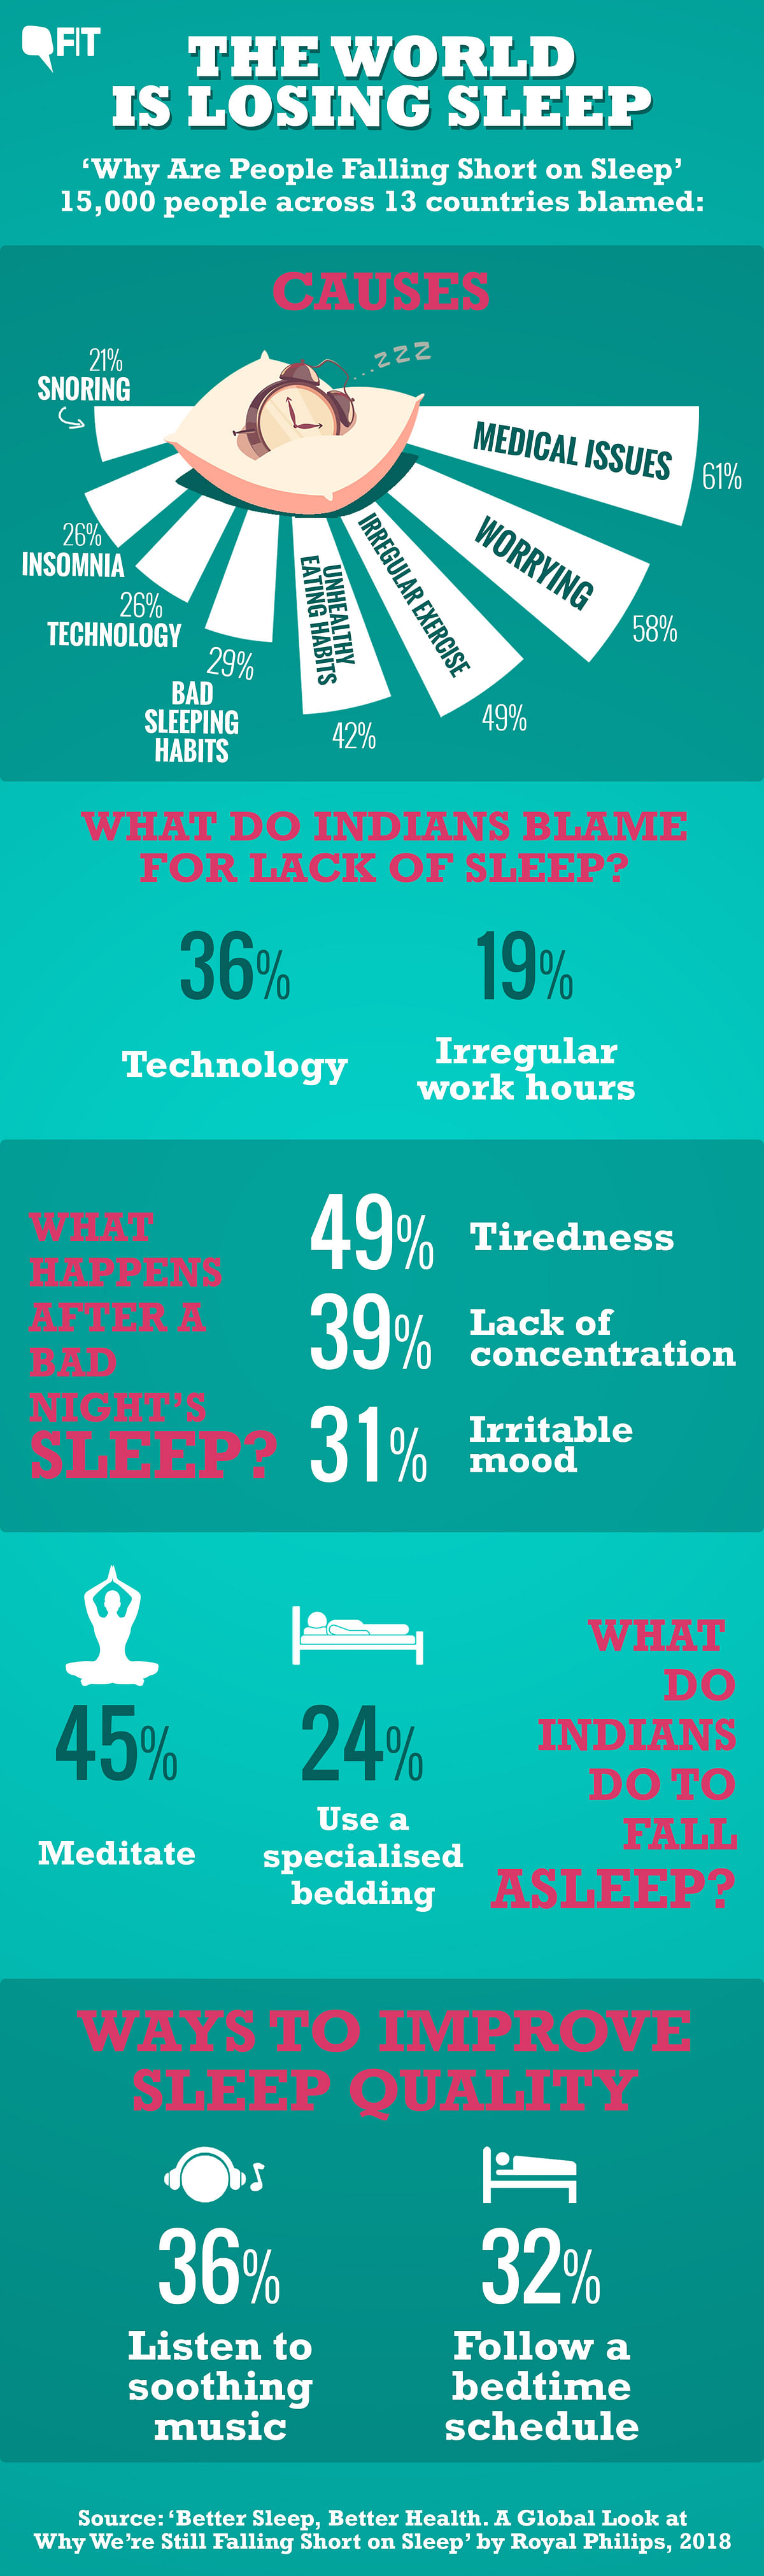 On World Sleep Day, the survey interviewed people from 12 countries to capture behaviours around sleep.